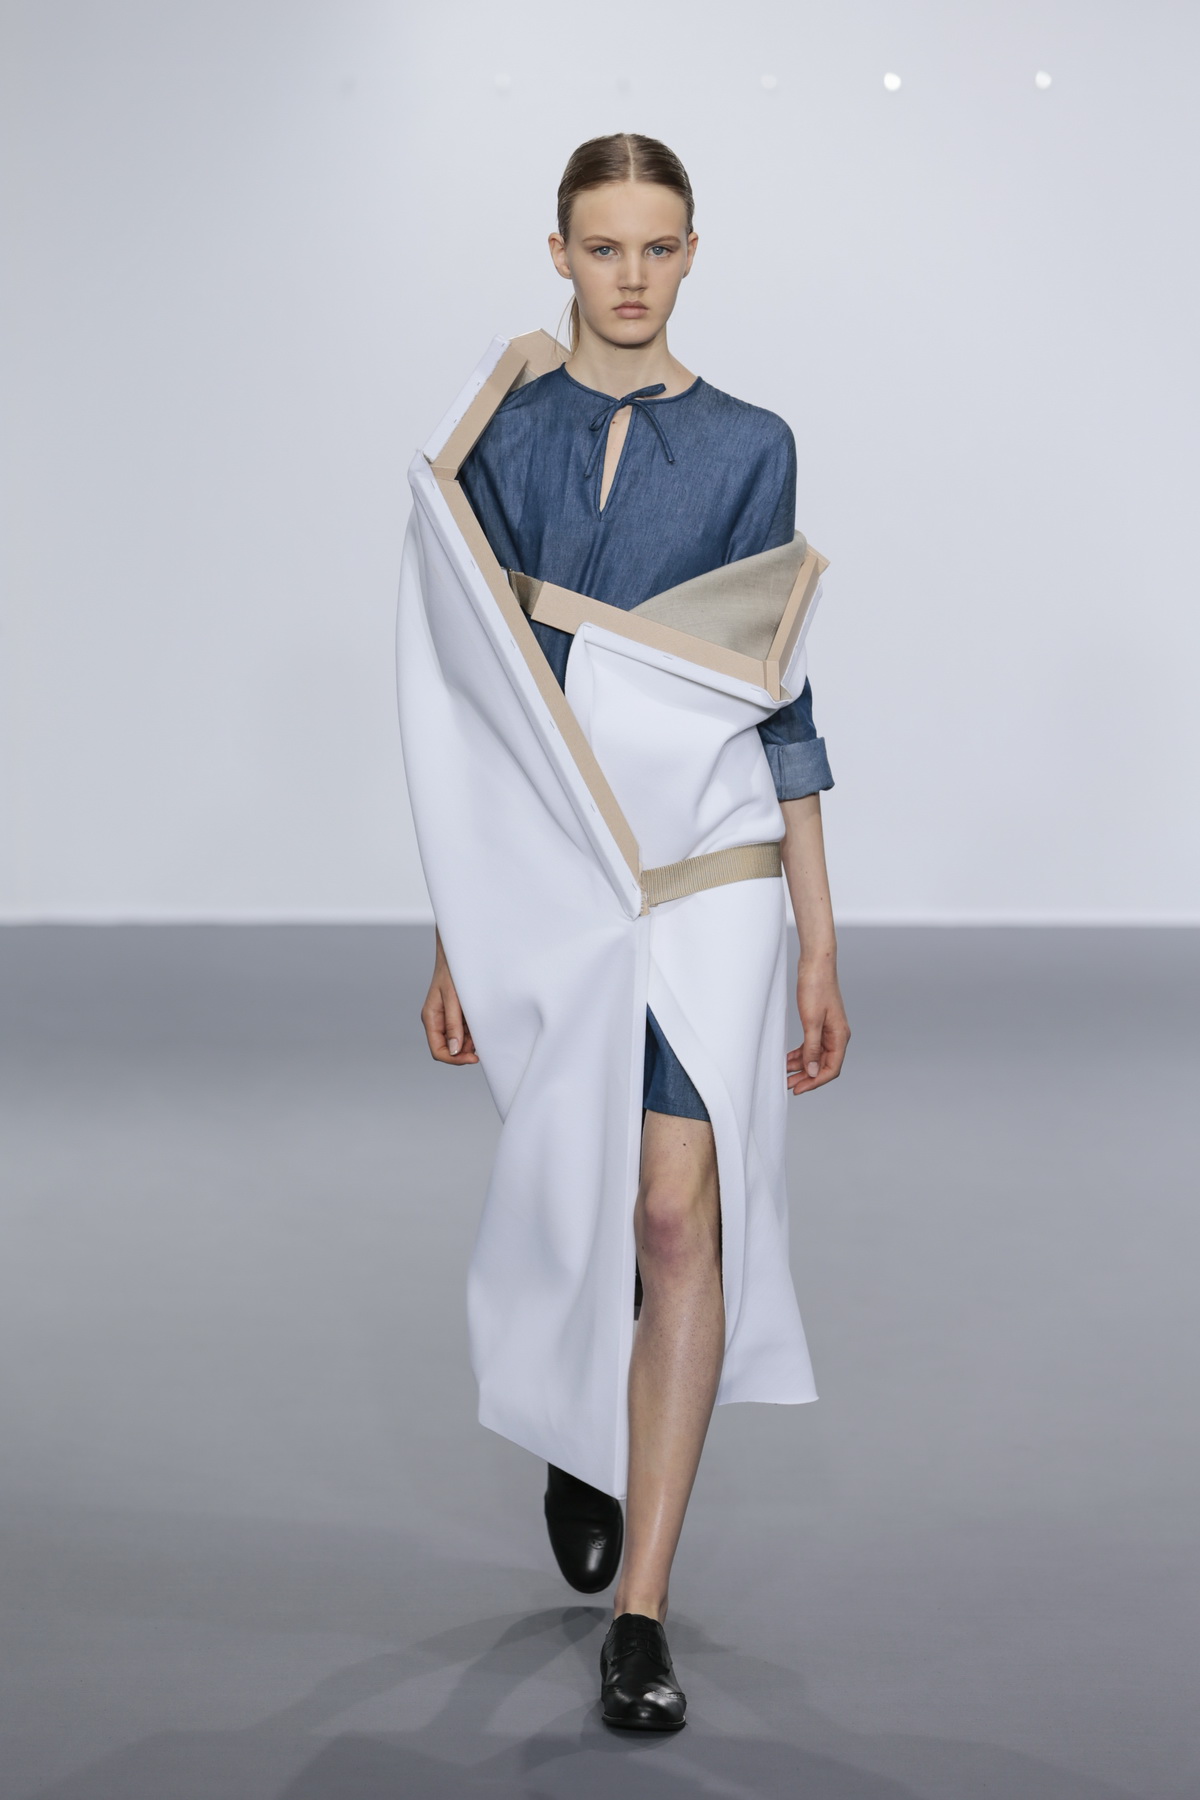 PHOTO © TEAM PETER STIGTER  FILENAME IS DESIGNER NAME FALL/WINTER 2015